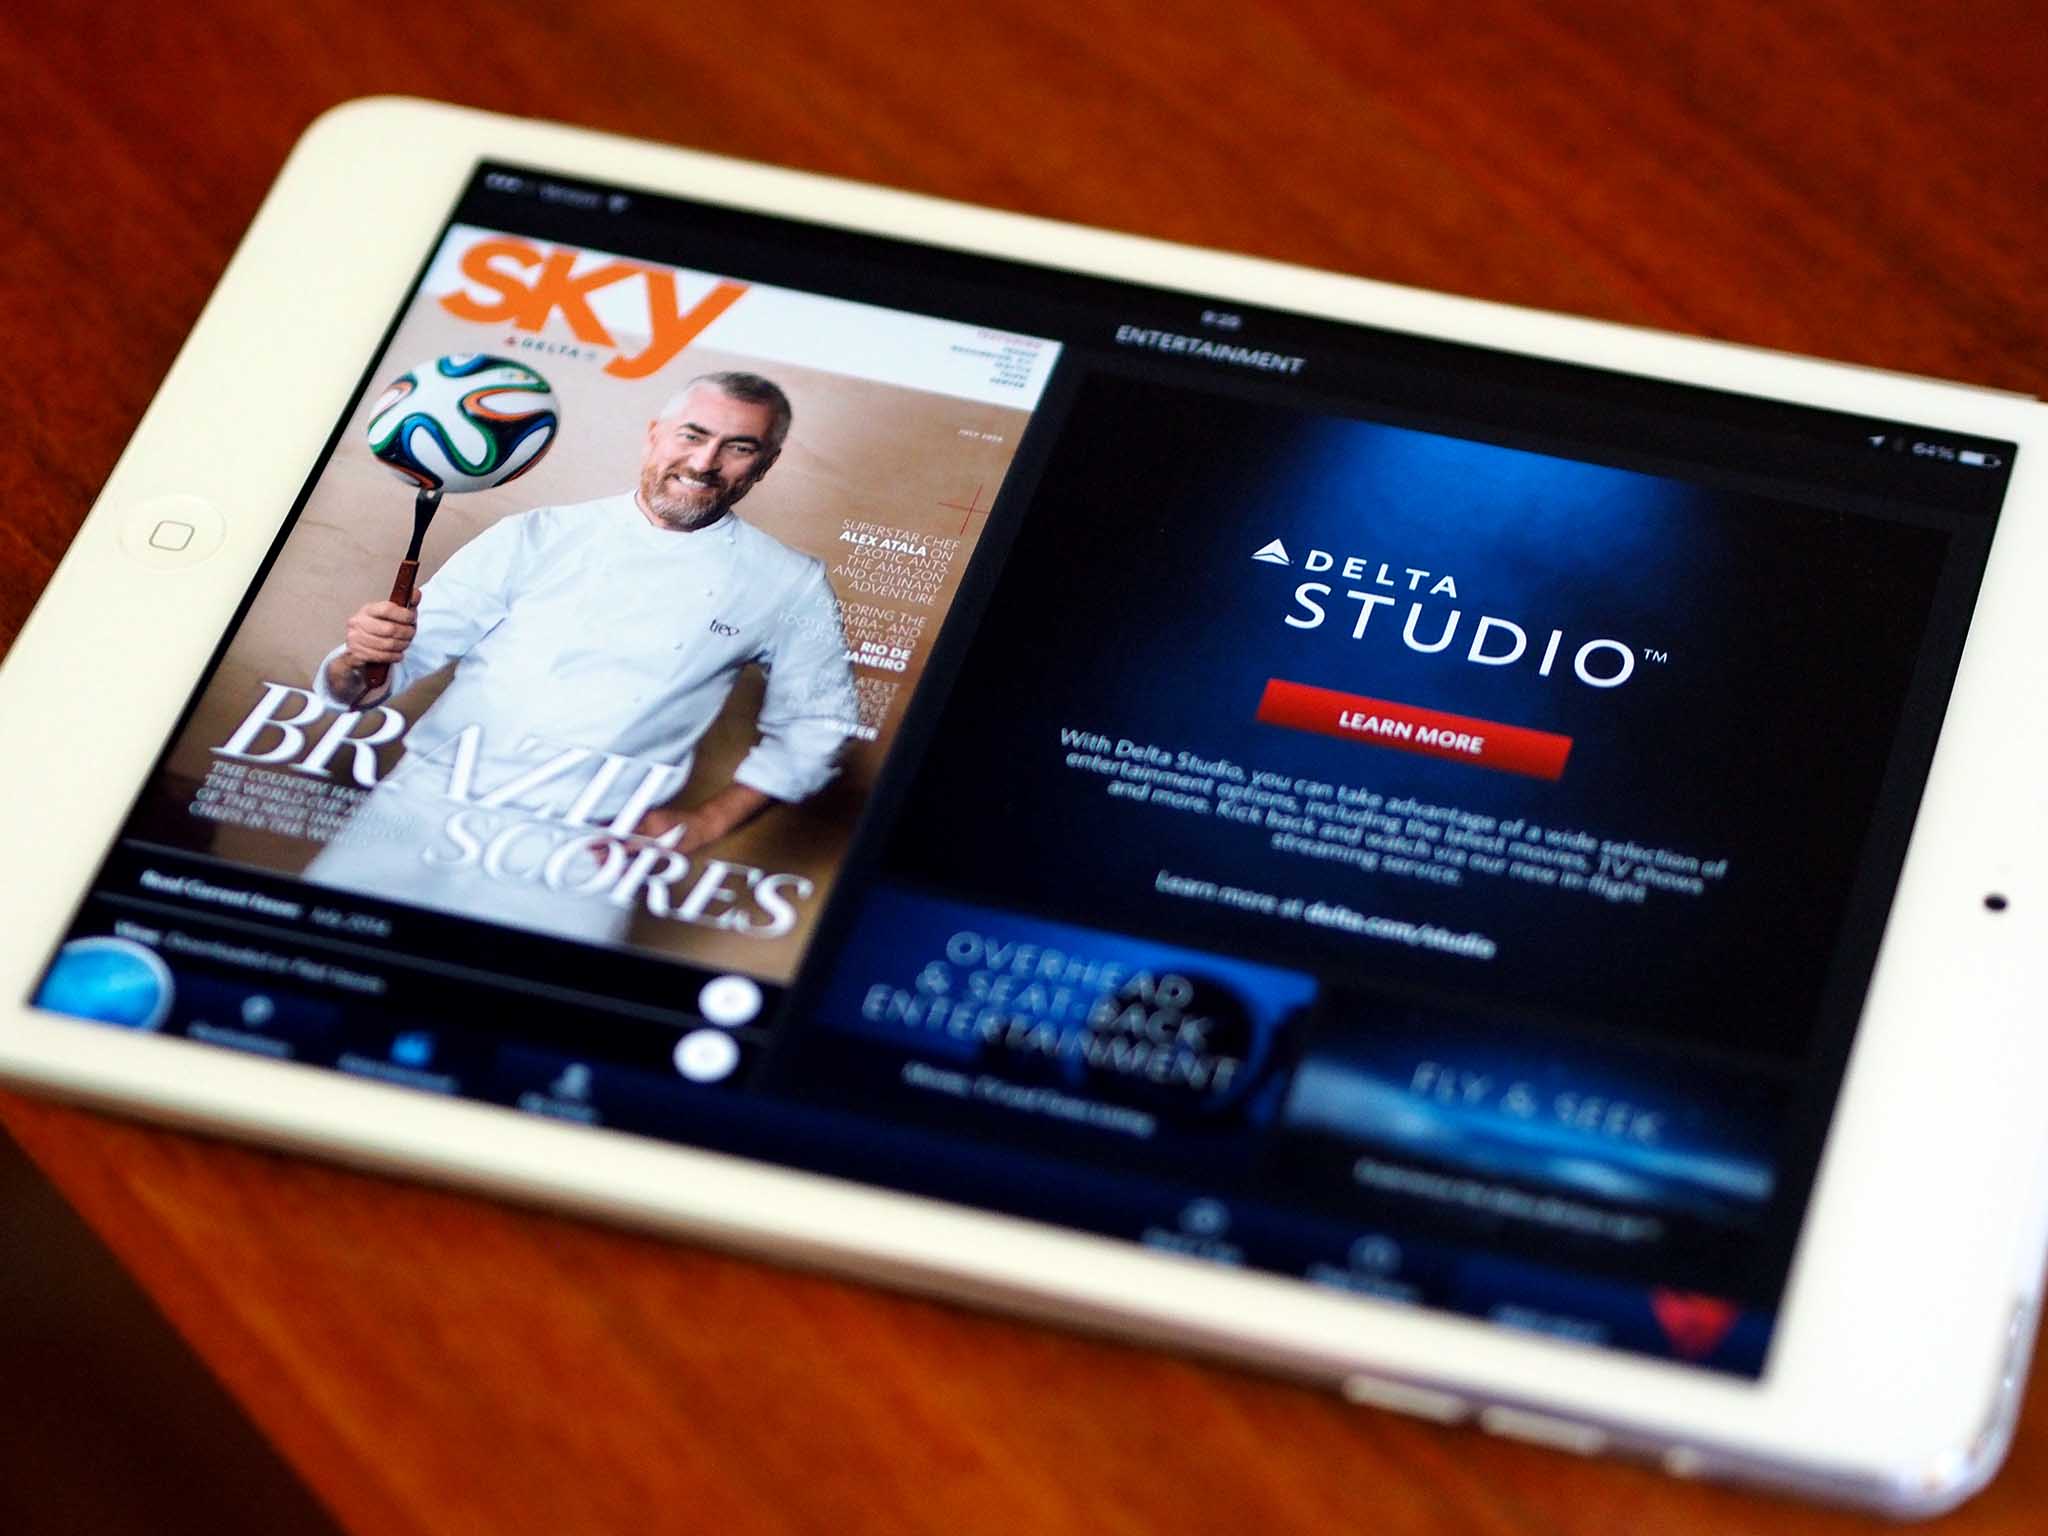 Stream movies on your iPad at 30,000 feet